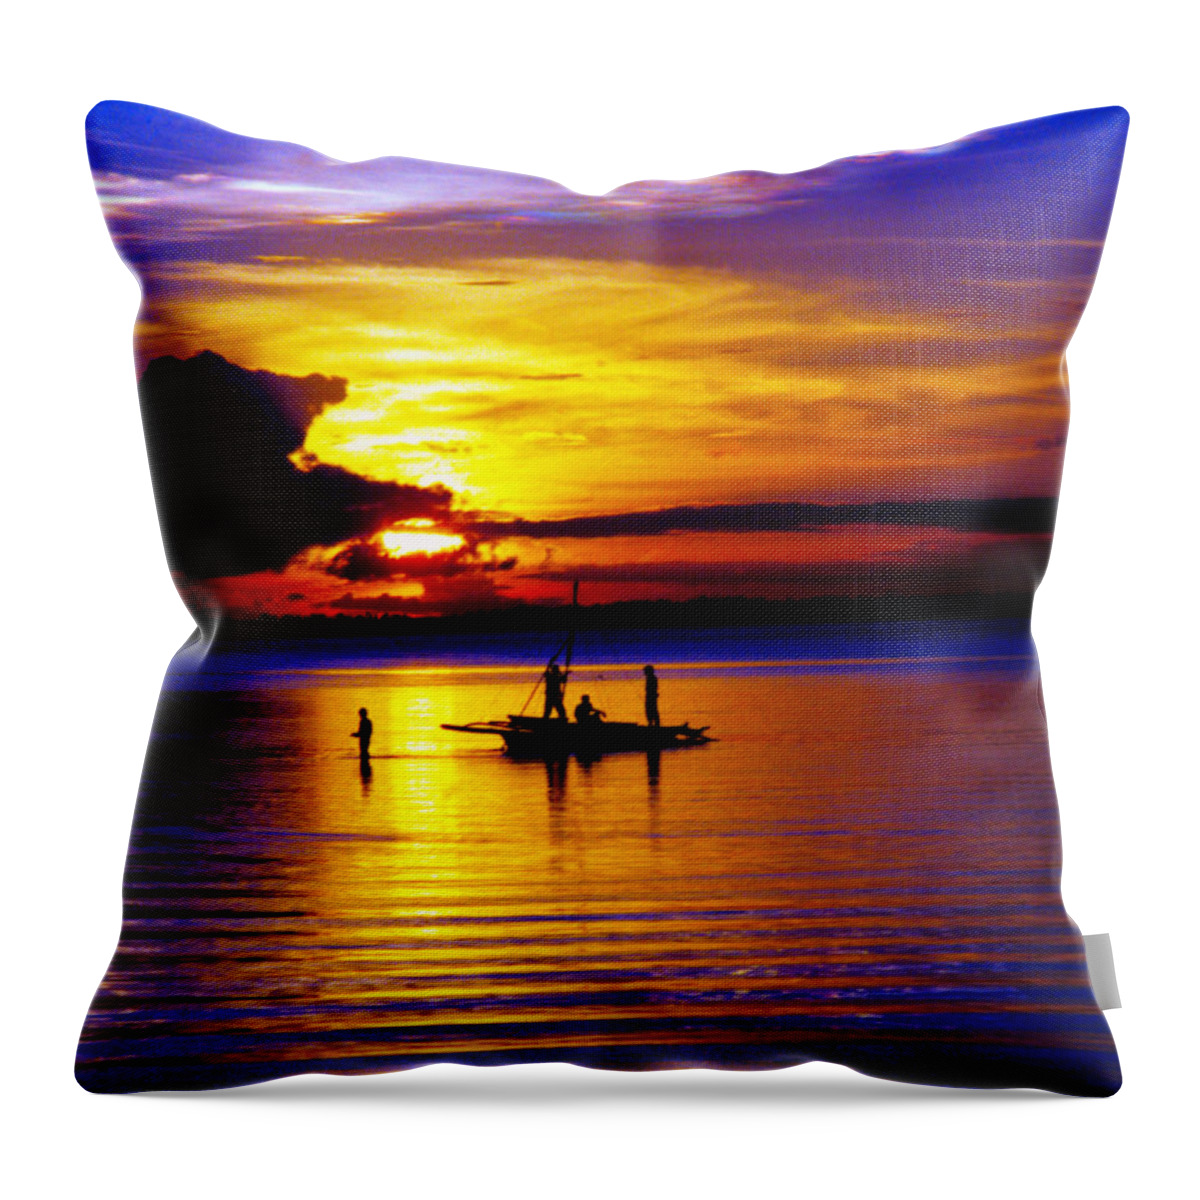 Sunset Throw Pillow featuring the photograph Colorful Golden Fishermen Sunset Vertical by James BO Insogna